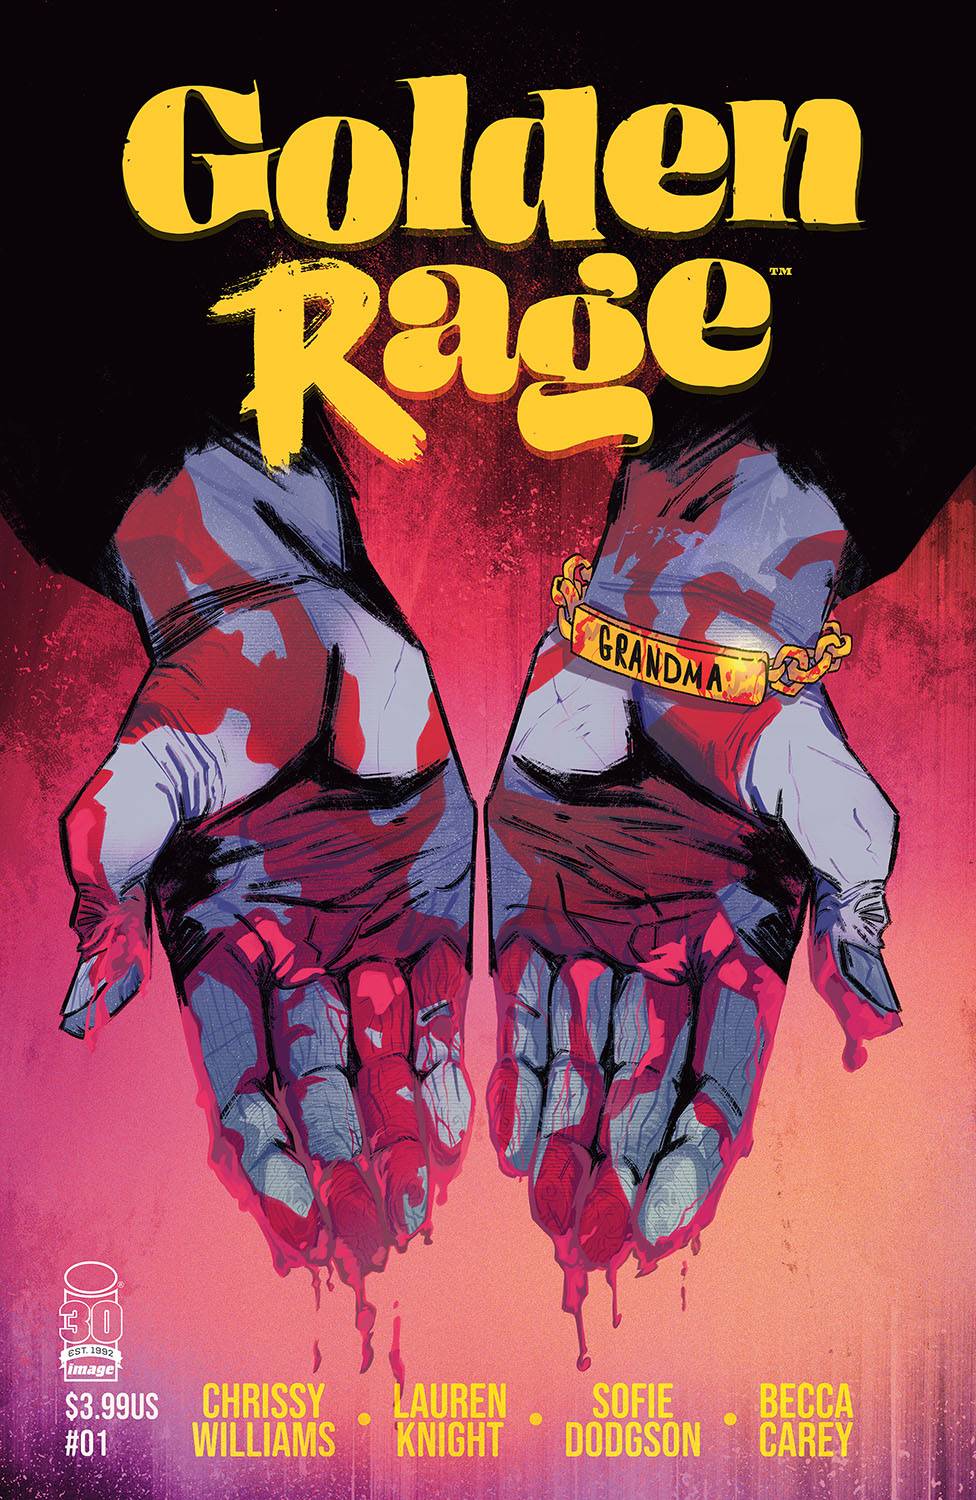 Golden Rage #1 (Cover A - Knight)